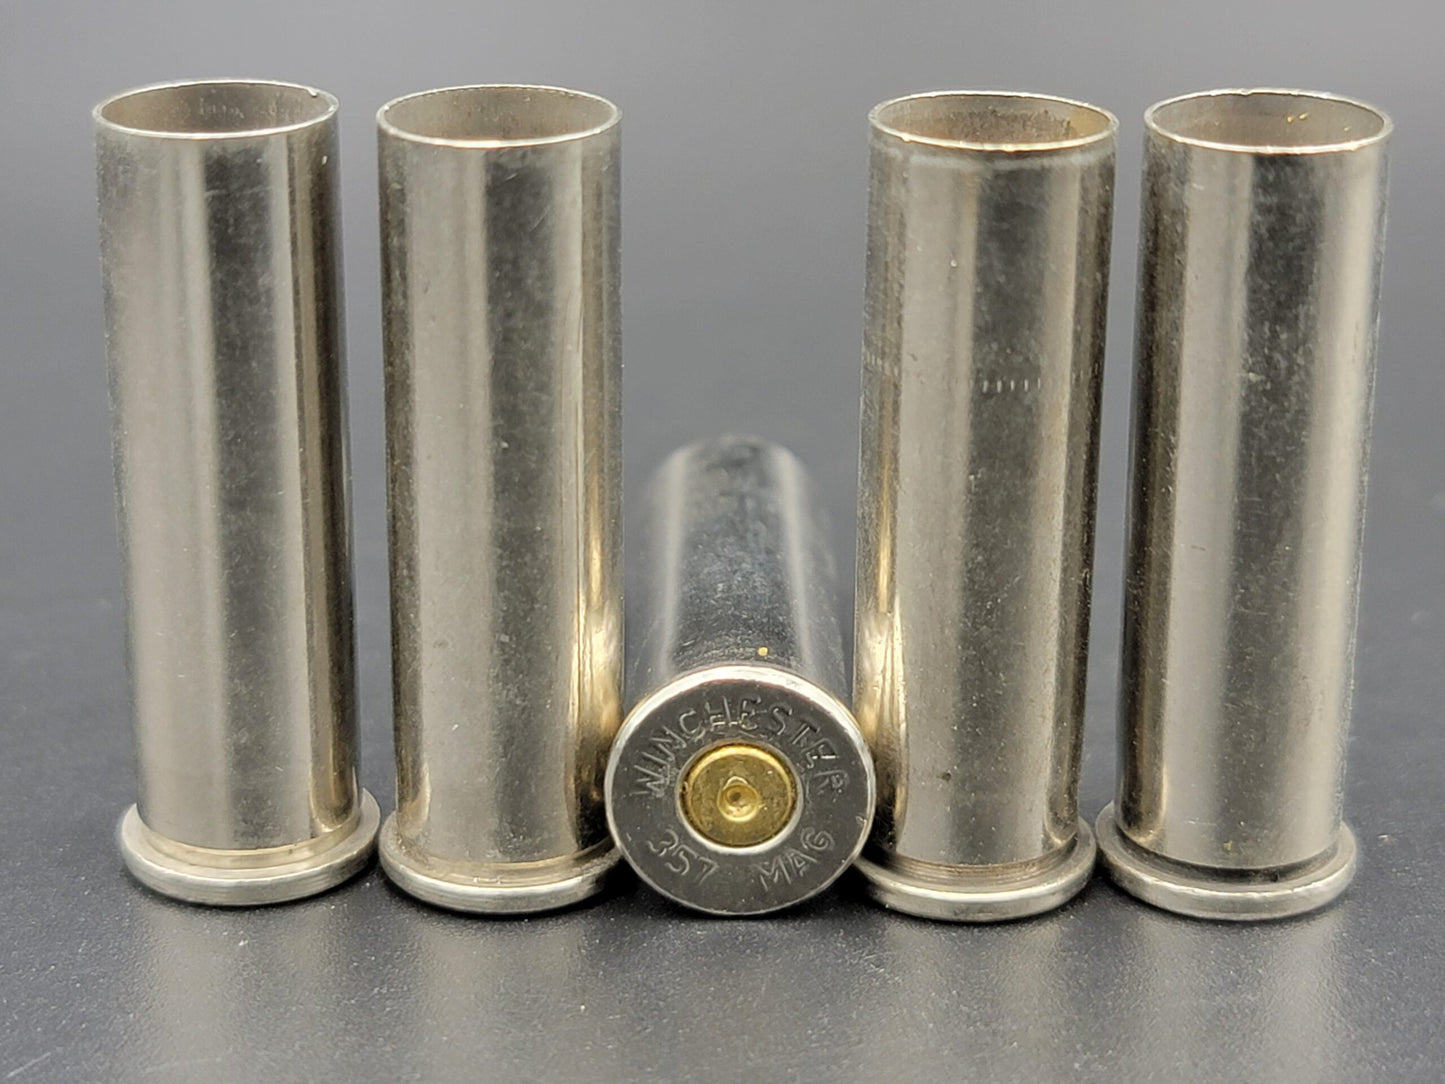 357 Mag once fired pistol nickel. Hand sorted from reputable indoor/military ranges for reloading. Reliable spent casings for precision shooting.